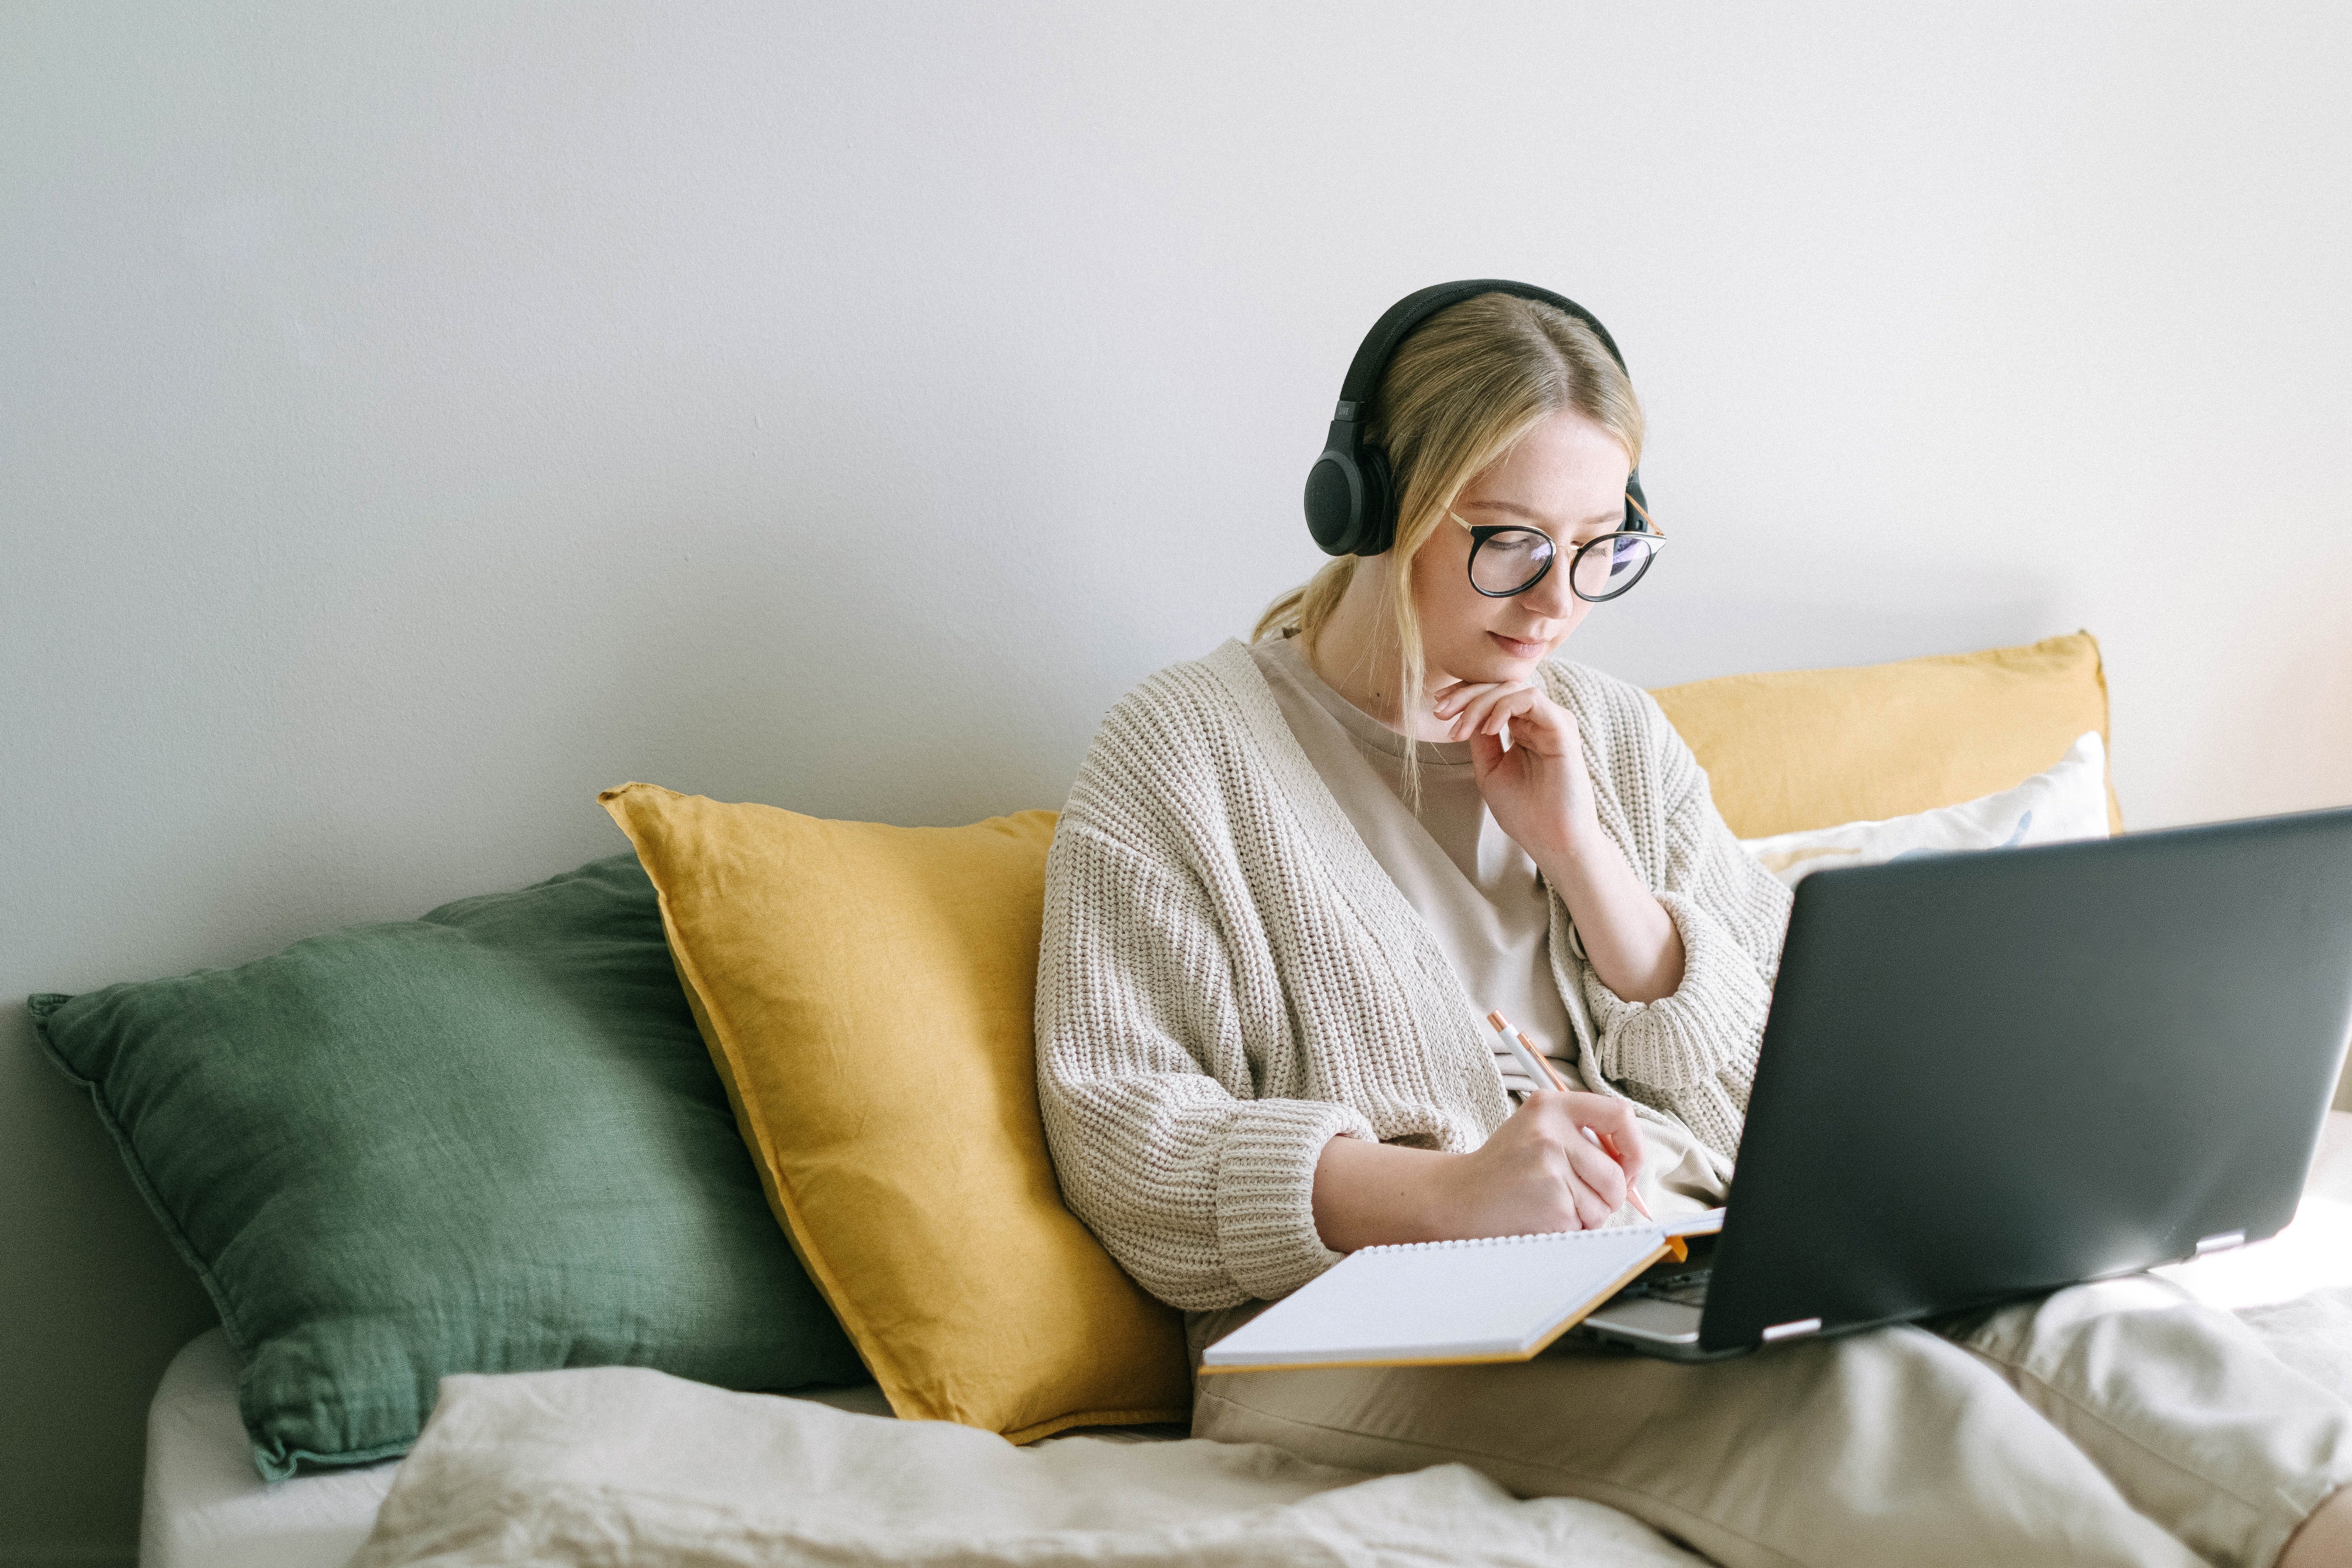 A woman with earphones working in bed | Source: Pexels